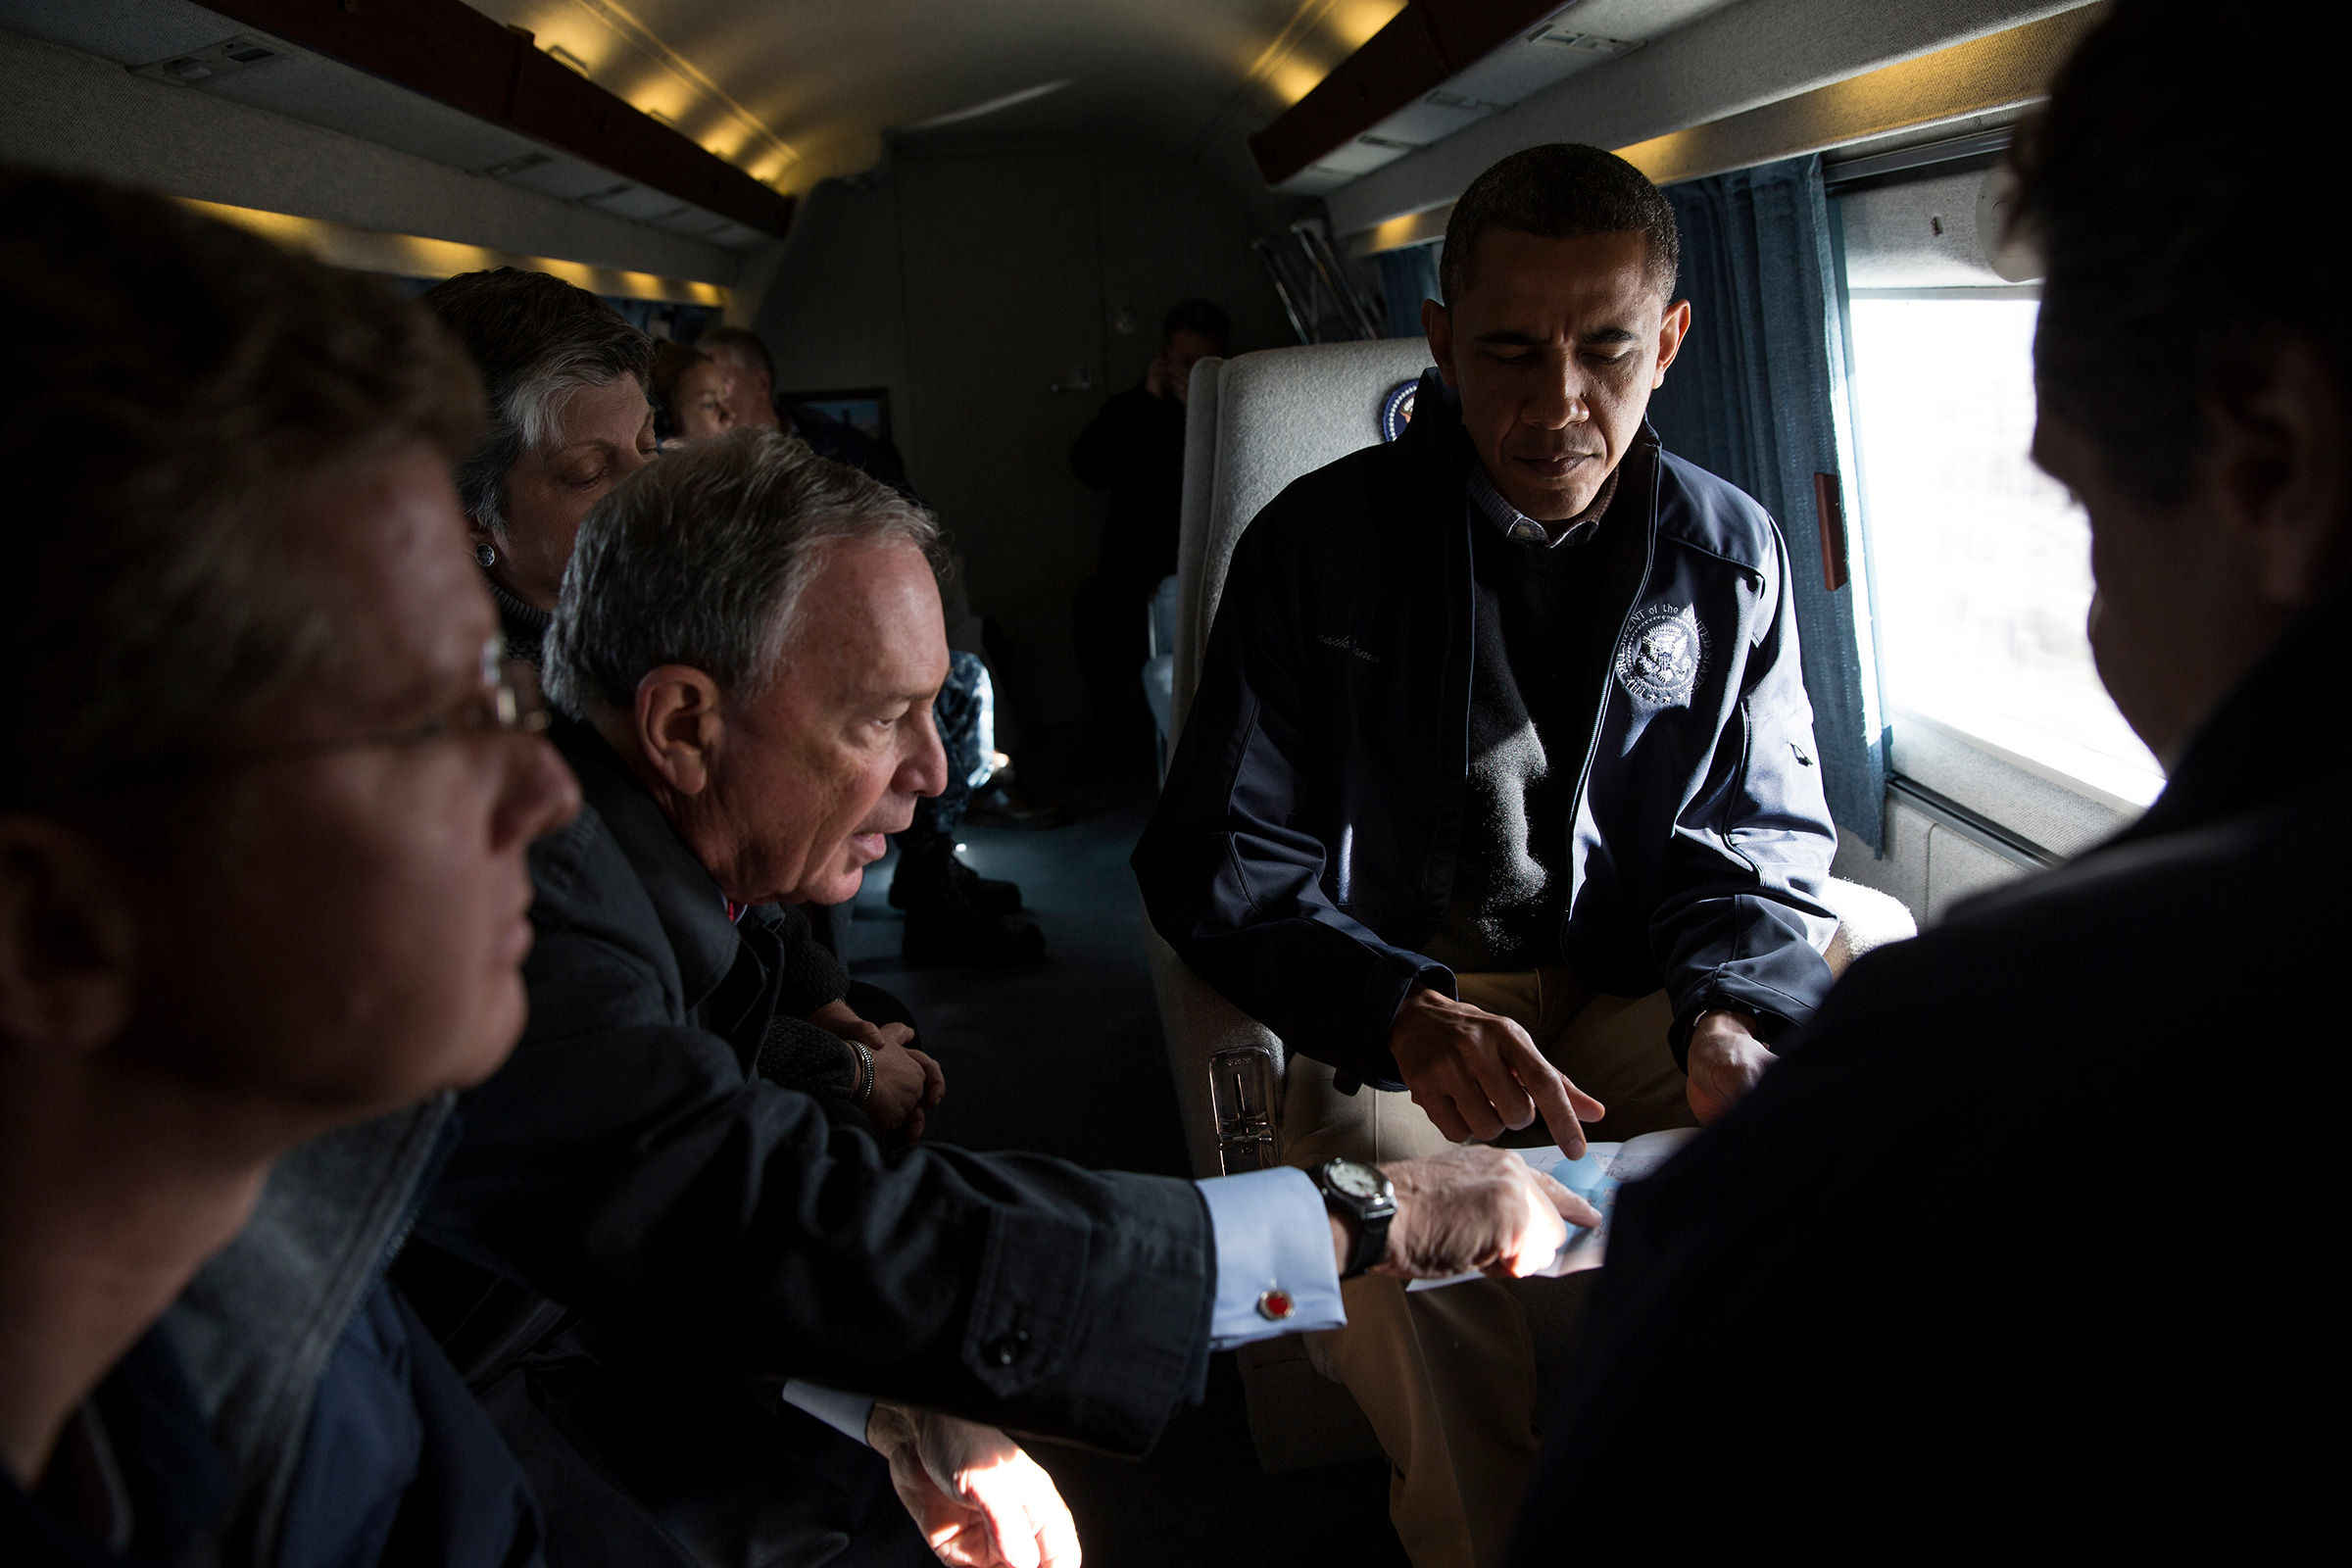 Bloomberg, the New York City mayor, views a map with President Obama during an aerial tour to view damage there from Superstorm Sandy on Nov. 15, 2012. (Pete Souza—The White House/Getty Images)